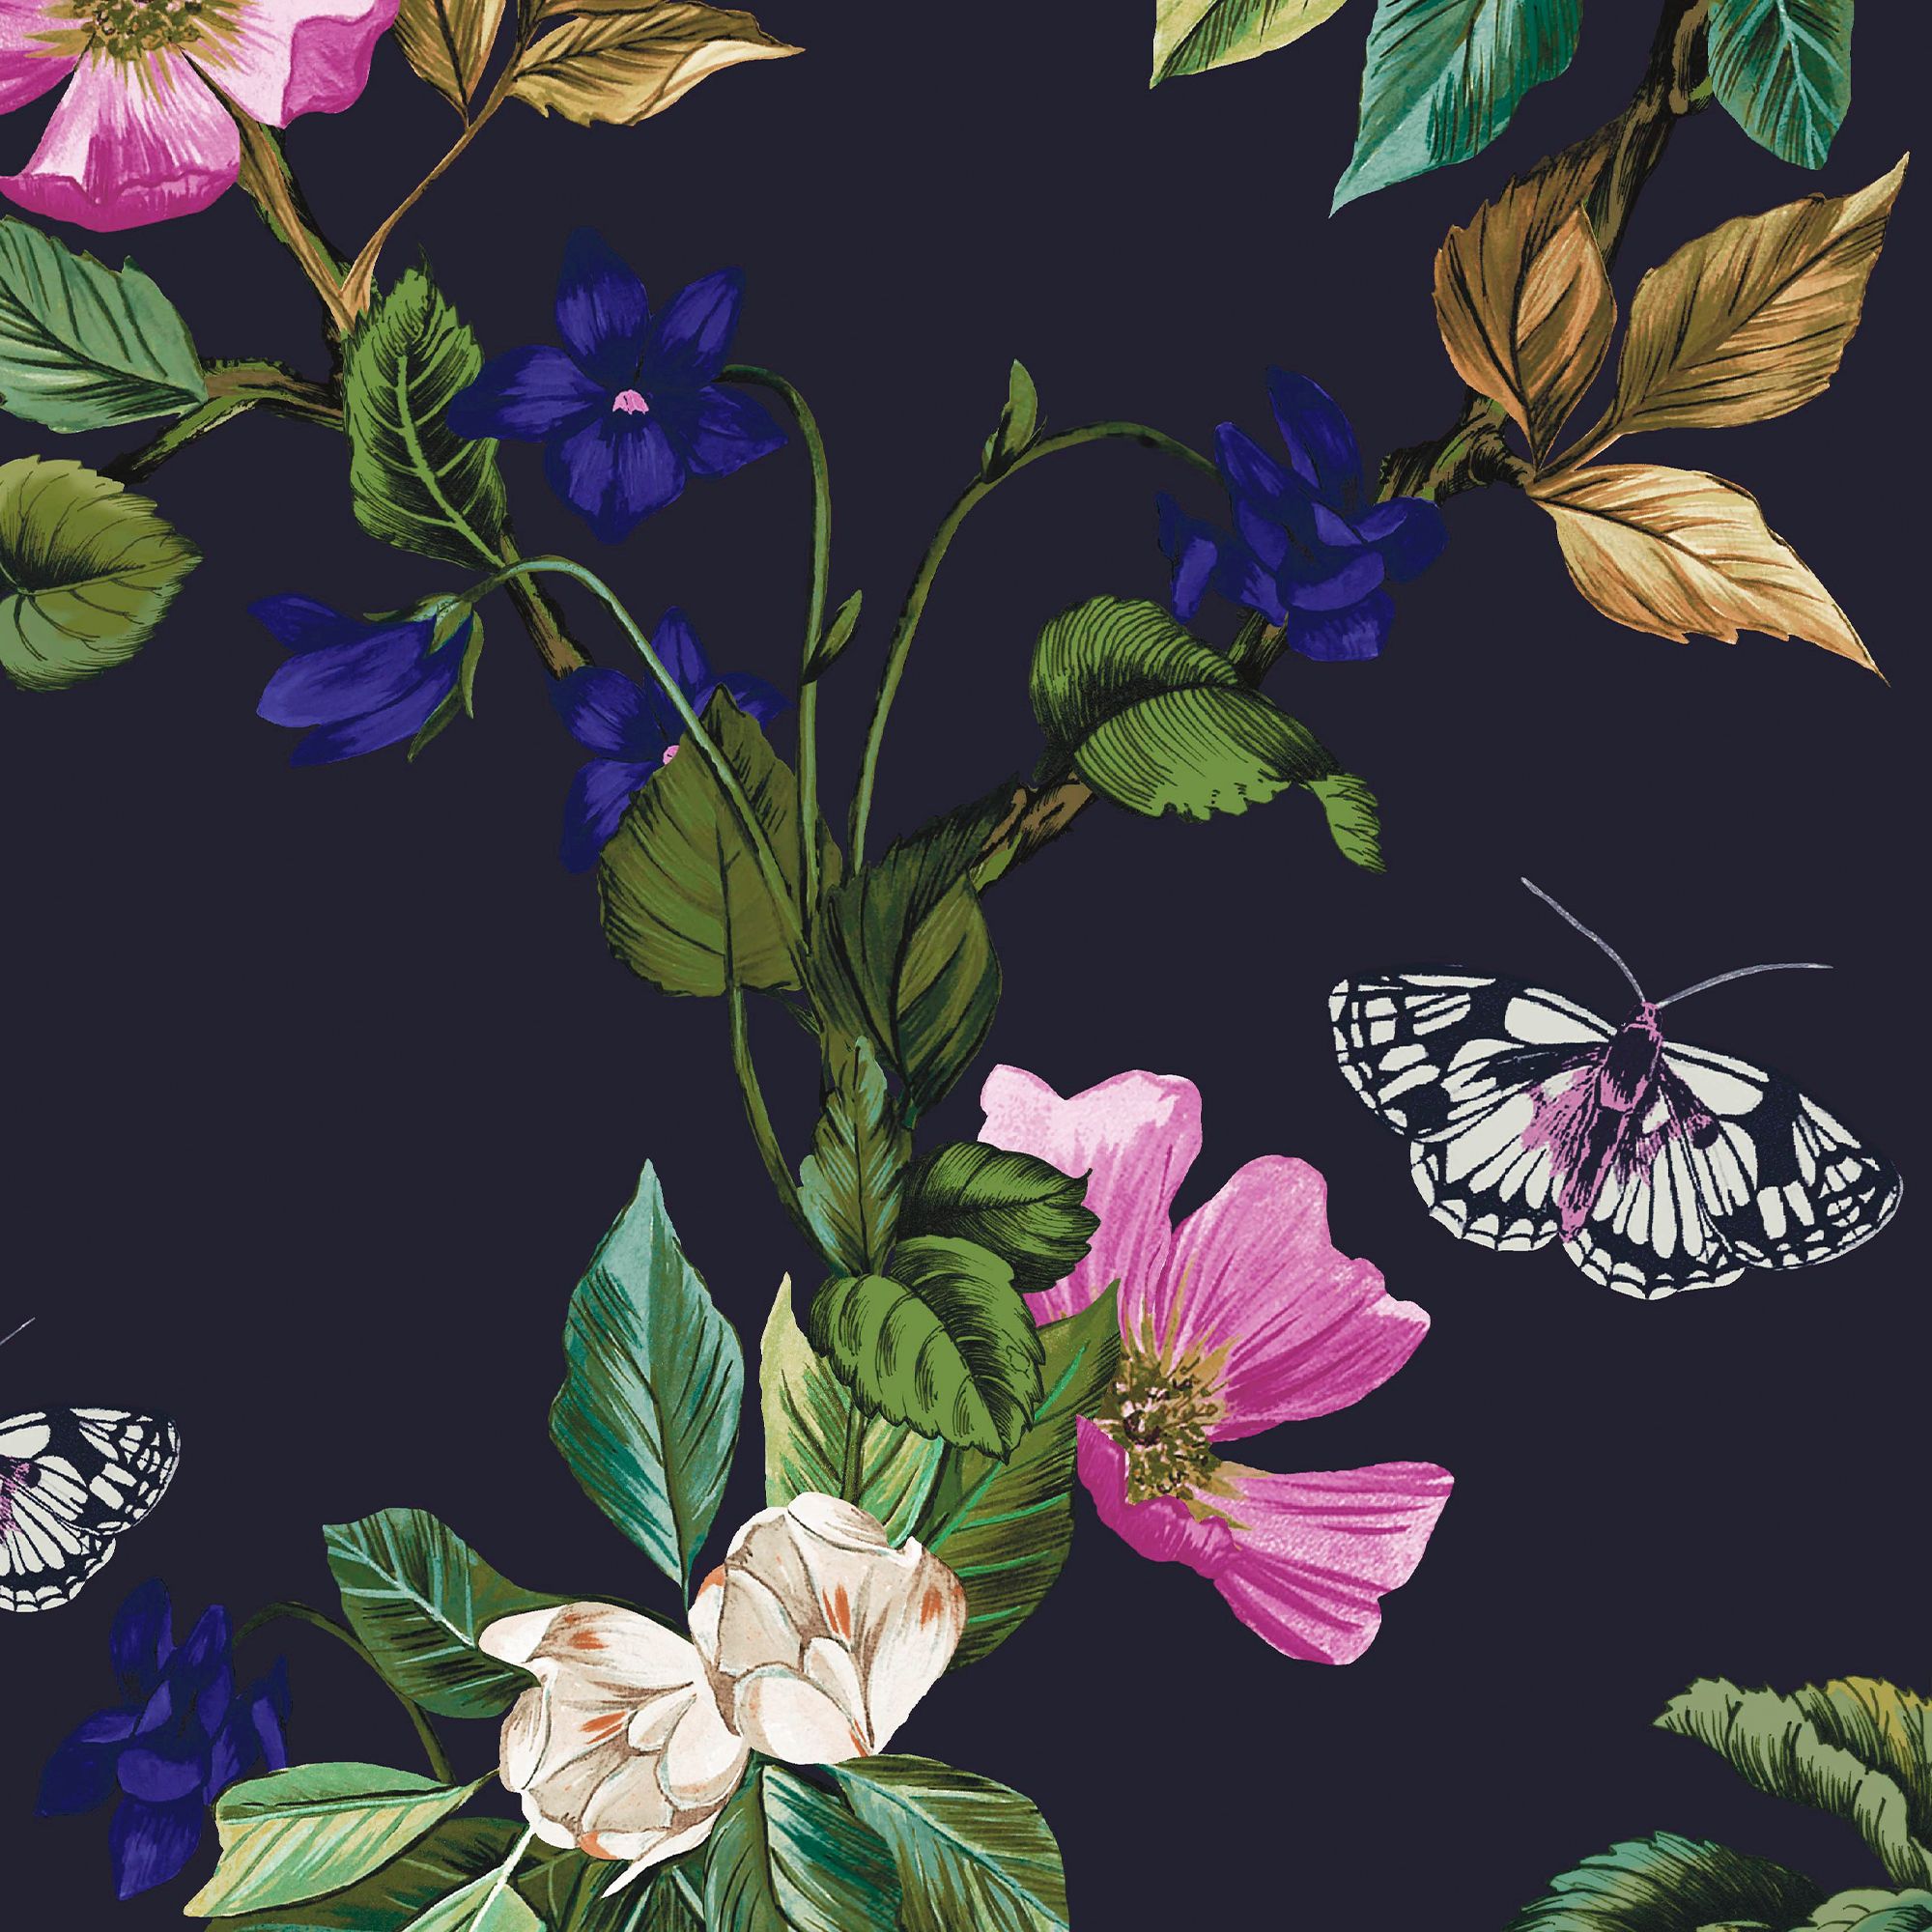 Joules Blue Woodland floral Smooth Wallpaper